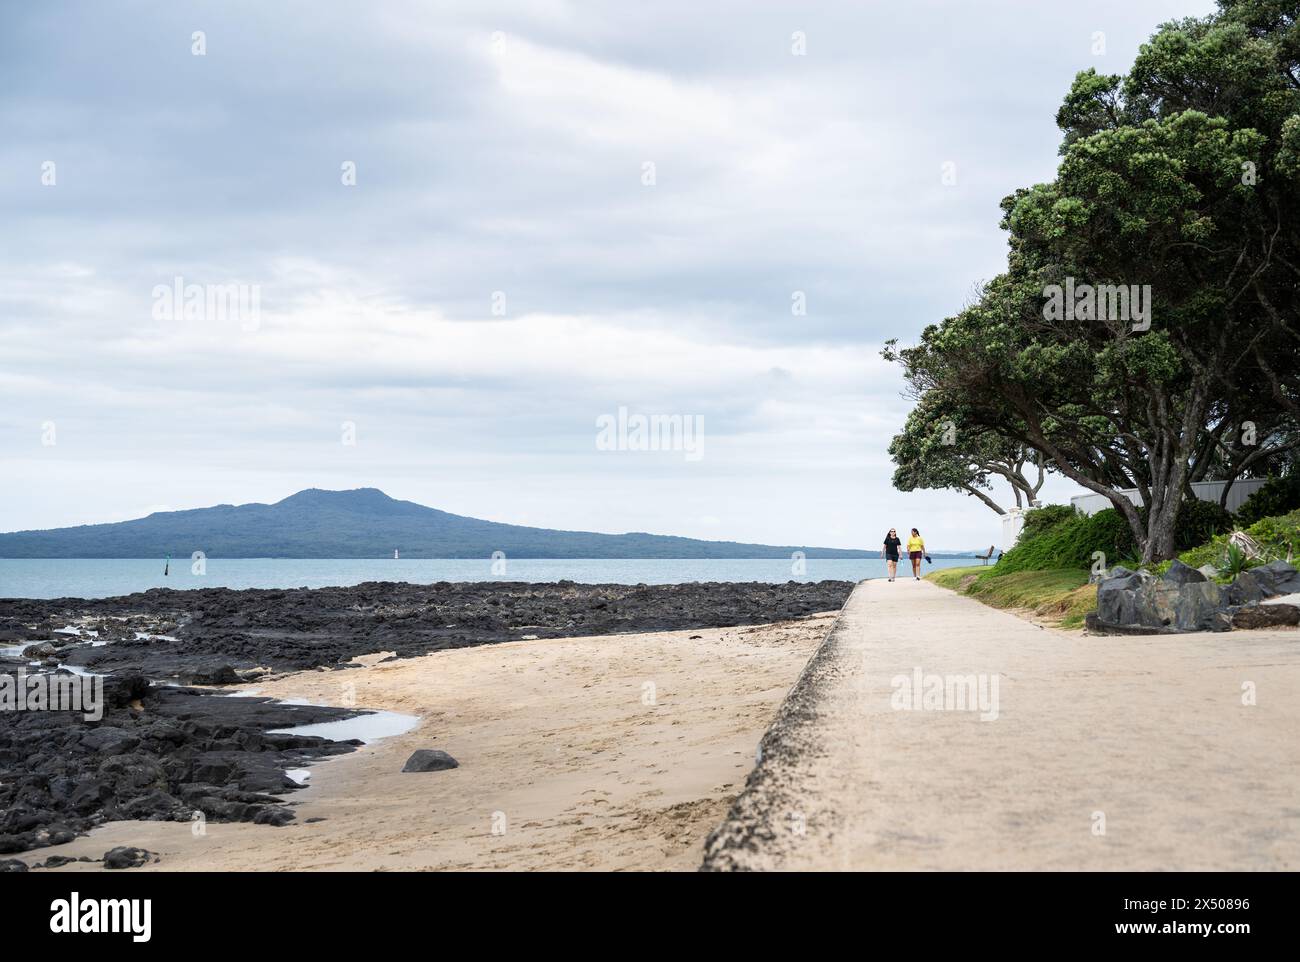 People walking on the beach. Rangitoto Island in the background; Milford Beach. Auckland. Stock Photo